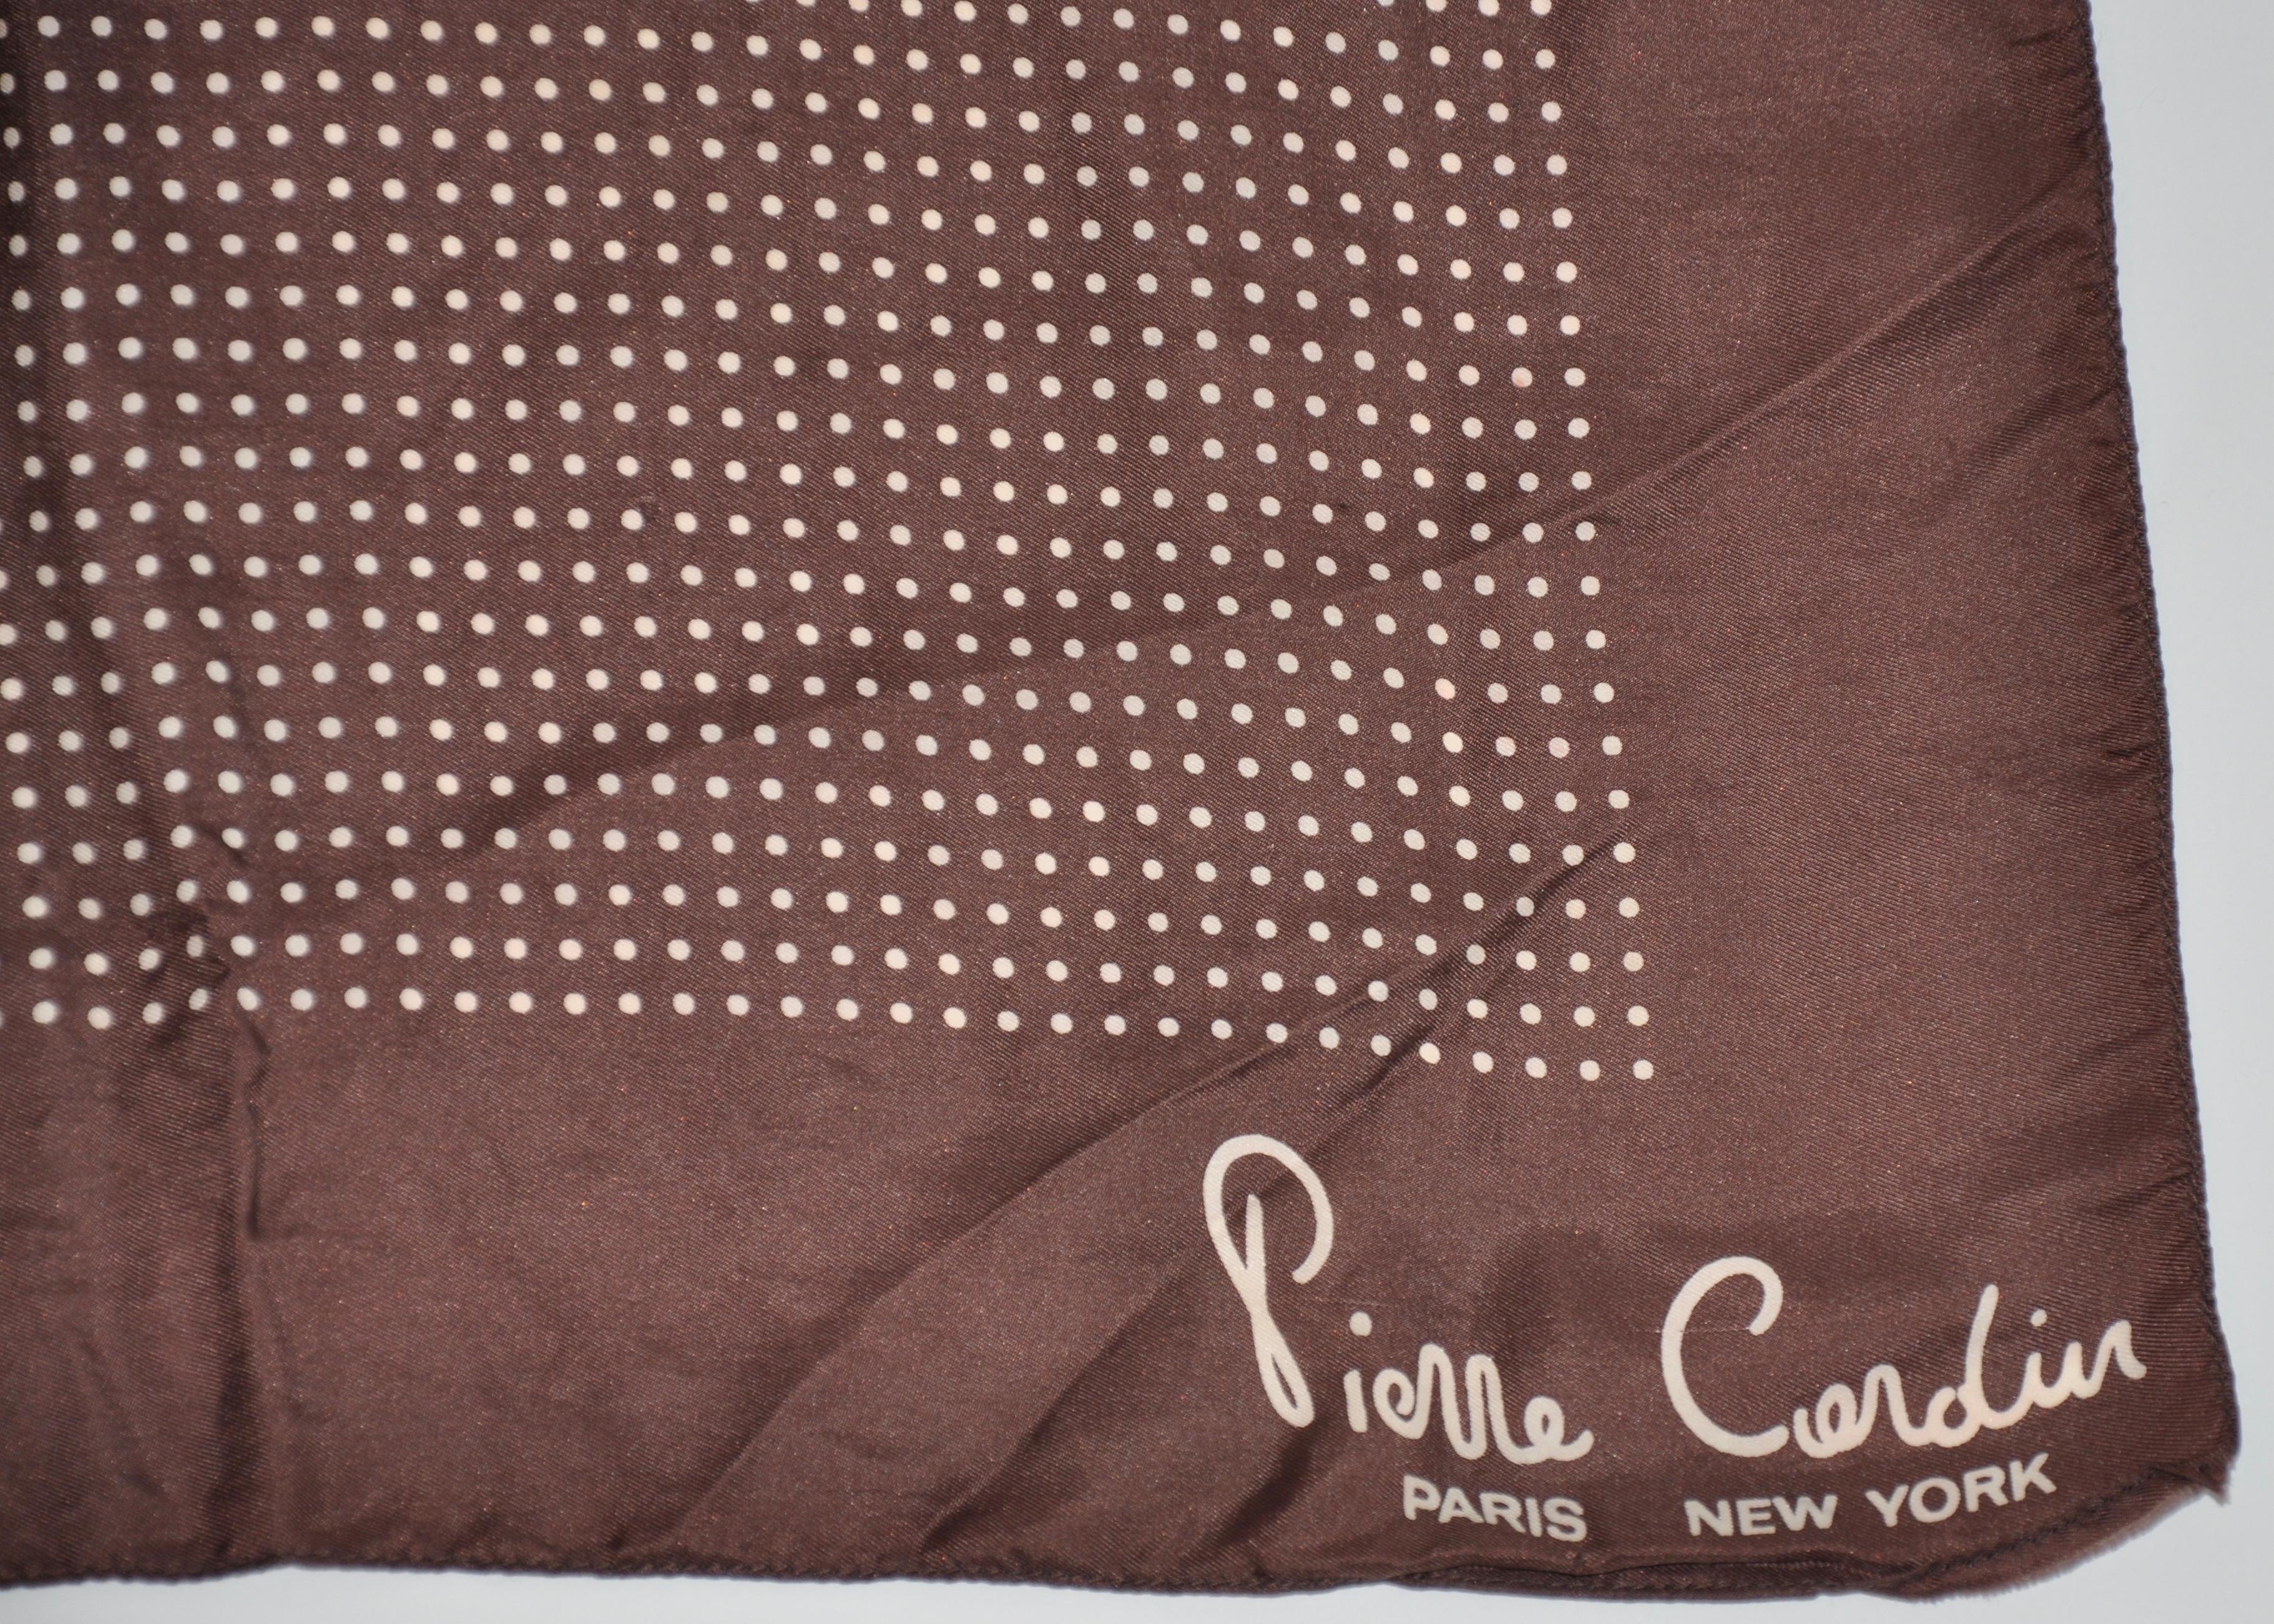        Pierre Cardin signature coco and cream silk handkerchief is accented with hand-rolled edges and measures 17 inches by 17 inches. Made in England.